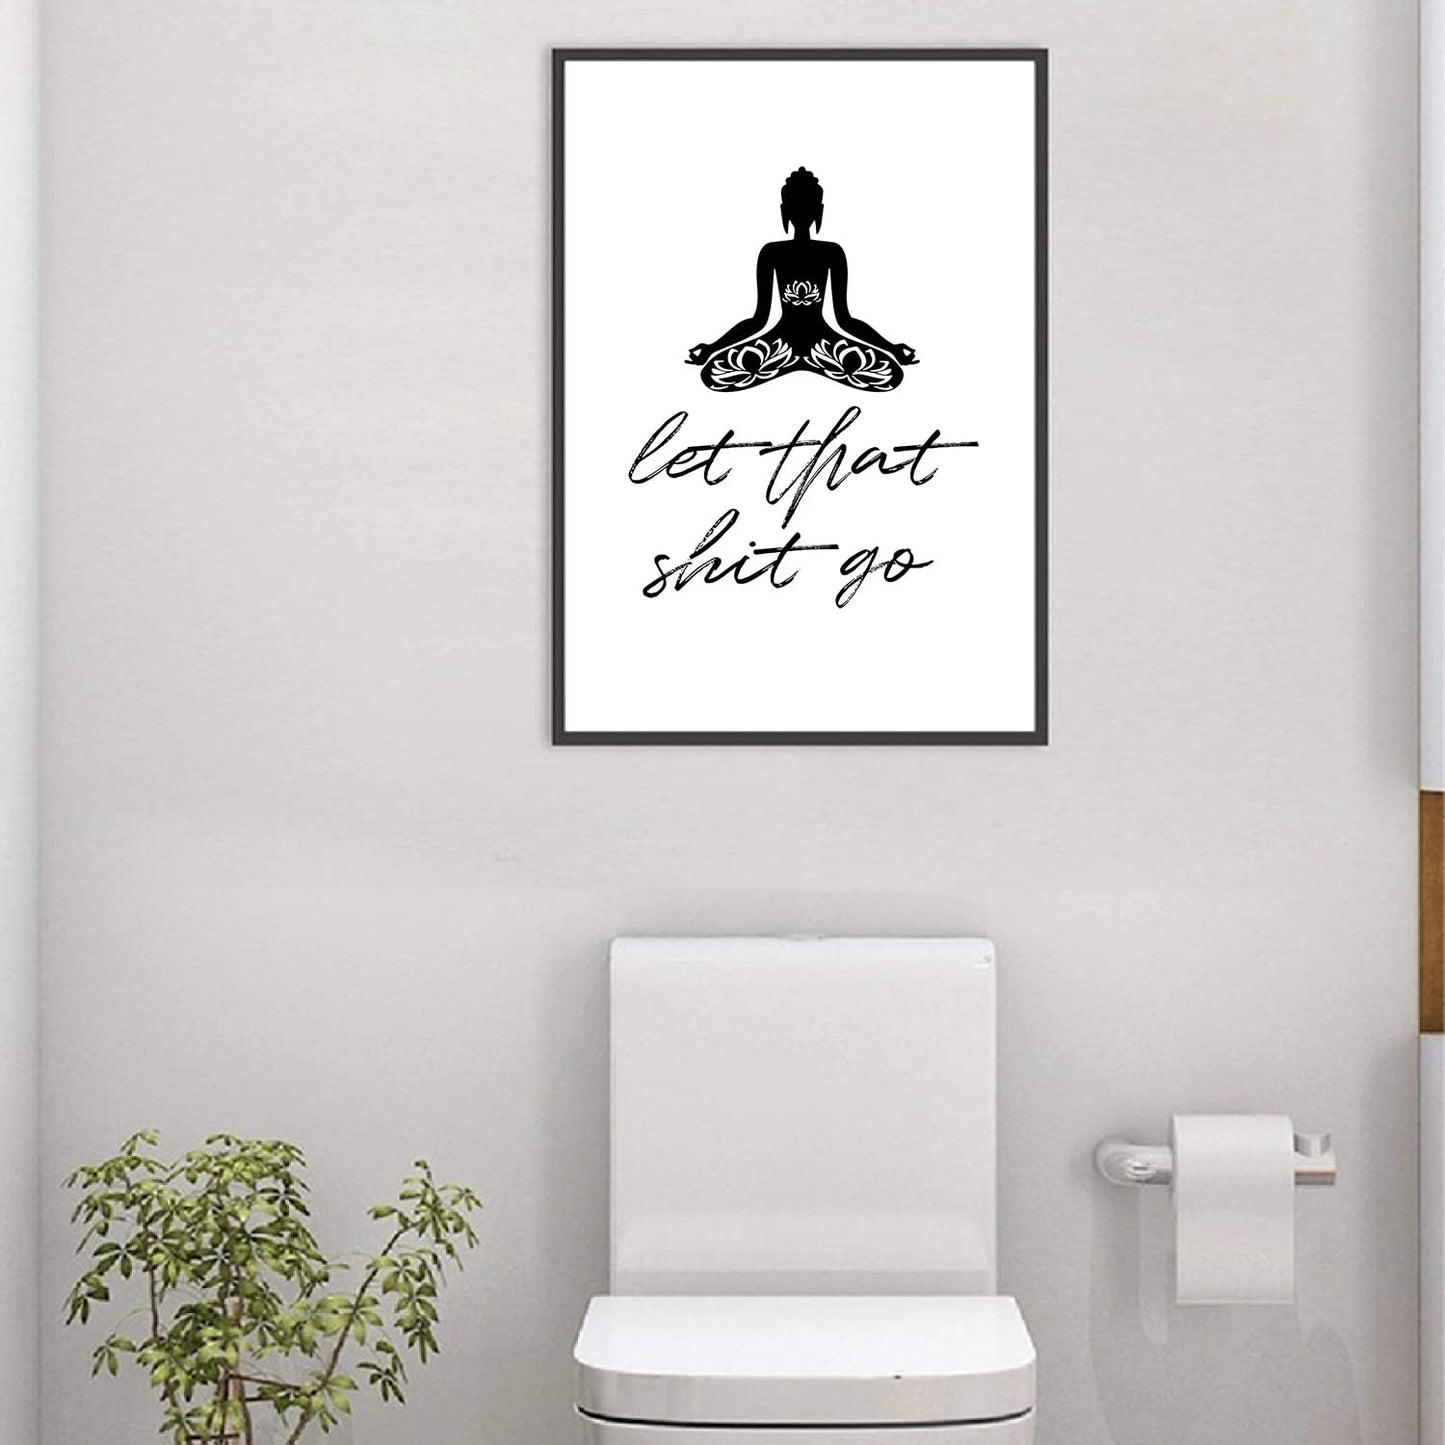 Ruitorly Funny Bathroom Decor Wall Art,Let That Shit Go bathroom art,funny bathroom wall art decor,Bathroom Pictures for Wall,Zen-Style Canvas Printing Poster-Pattern B-16x20inch(40x50cm)